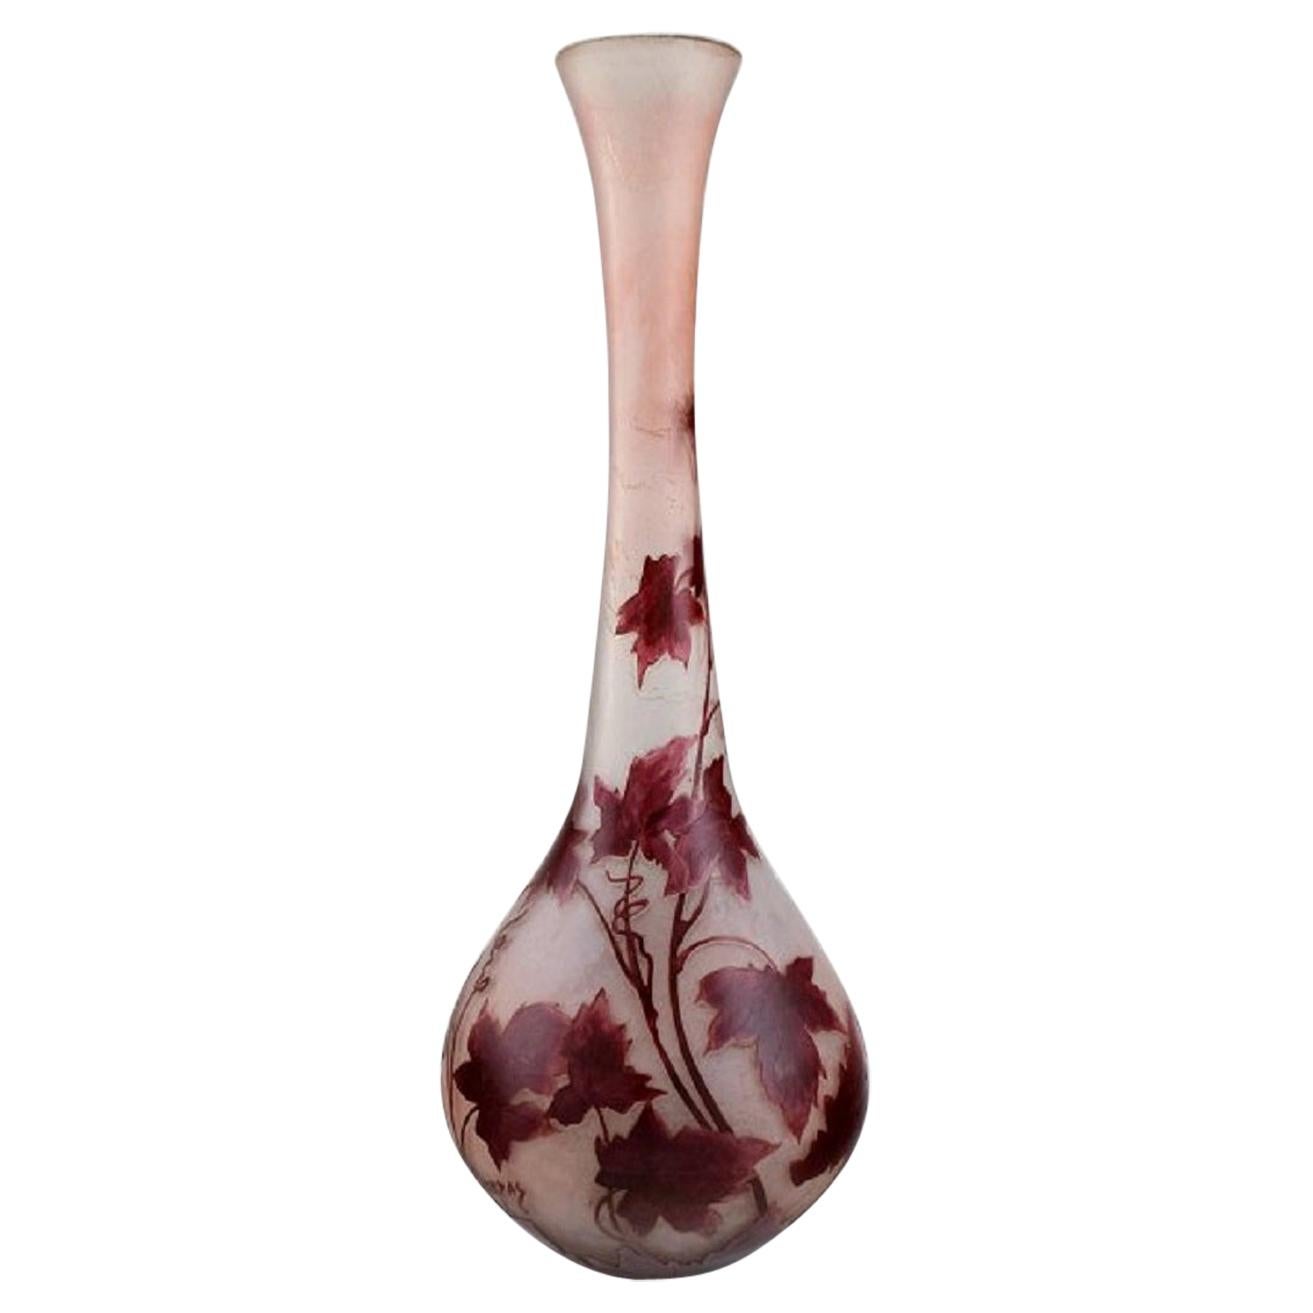 Legras, France, Large Vase in Red and Frosted Art Glass in Violet Tones, 1920s